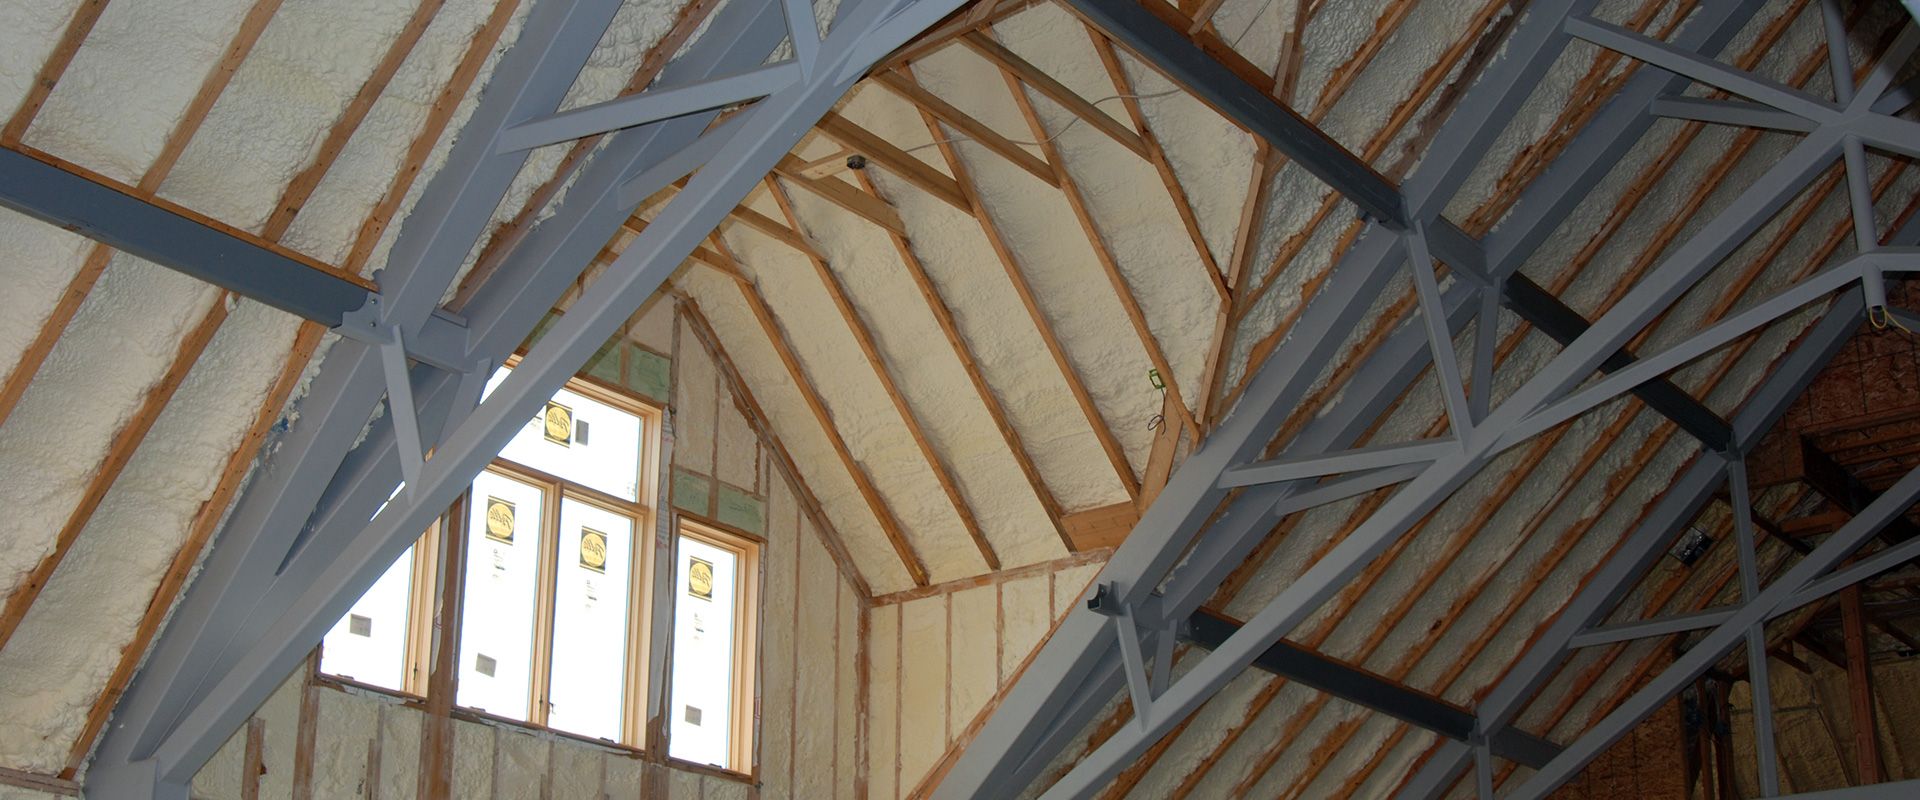 Spray Foam Insulation on New Residential Construction Project